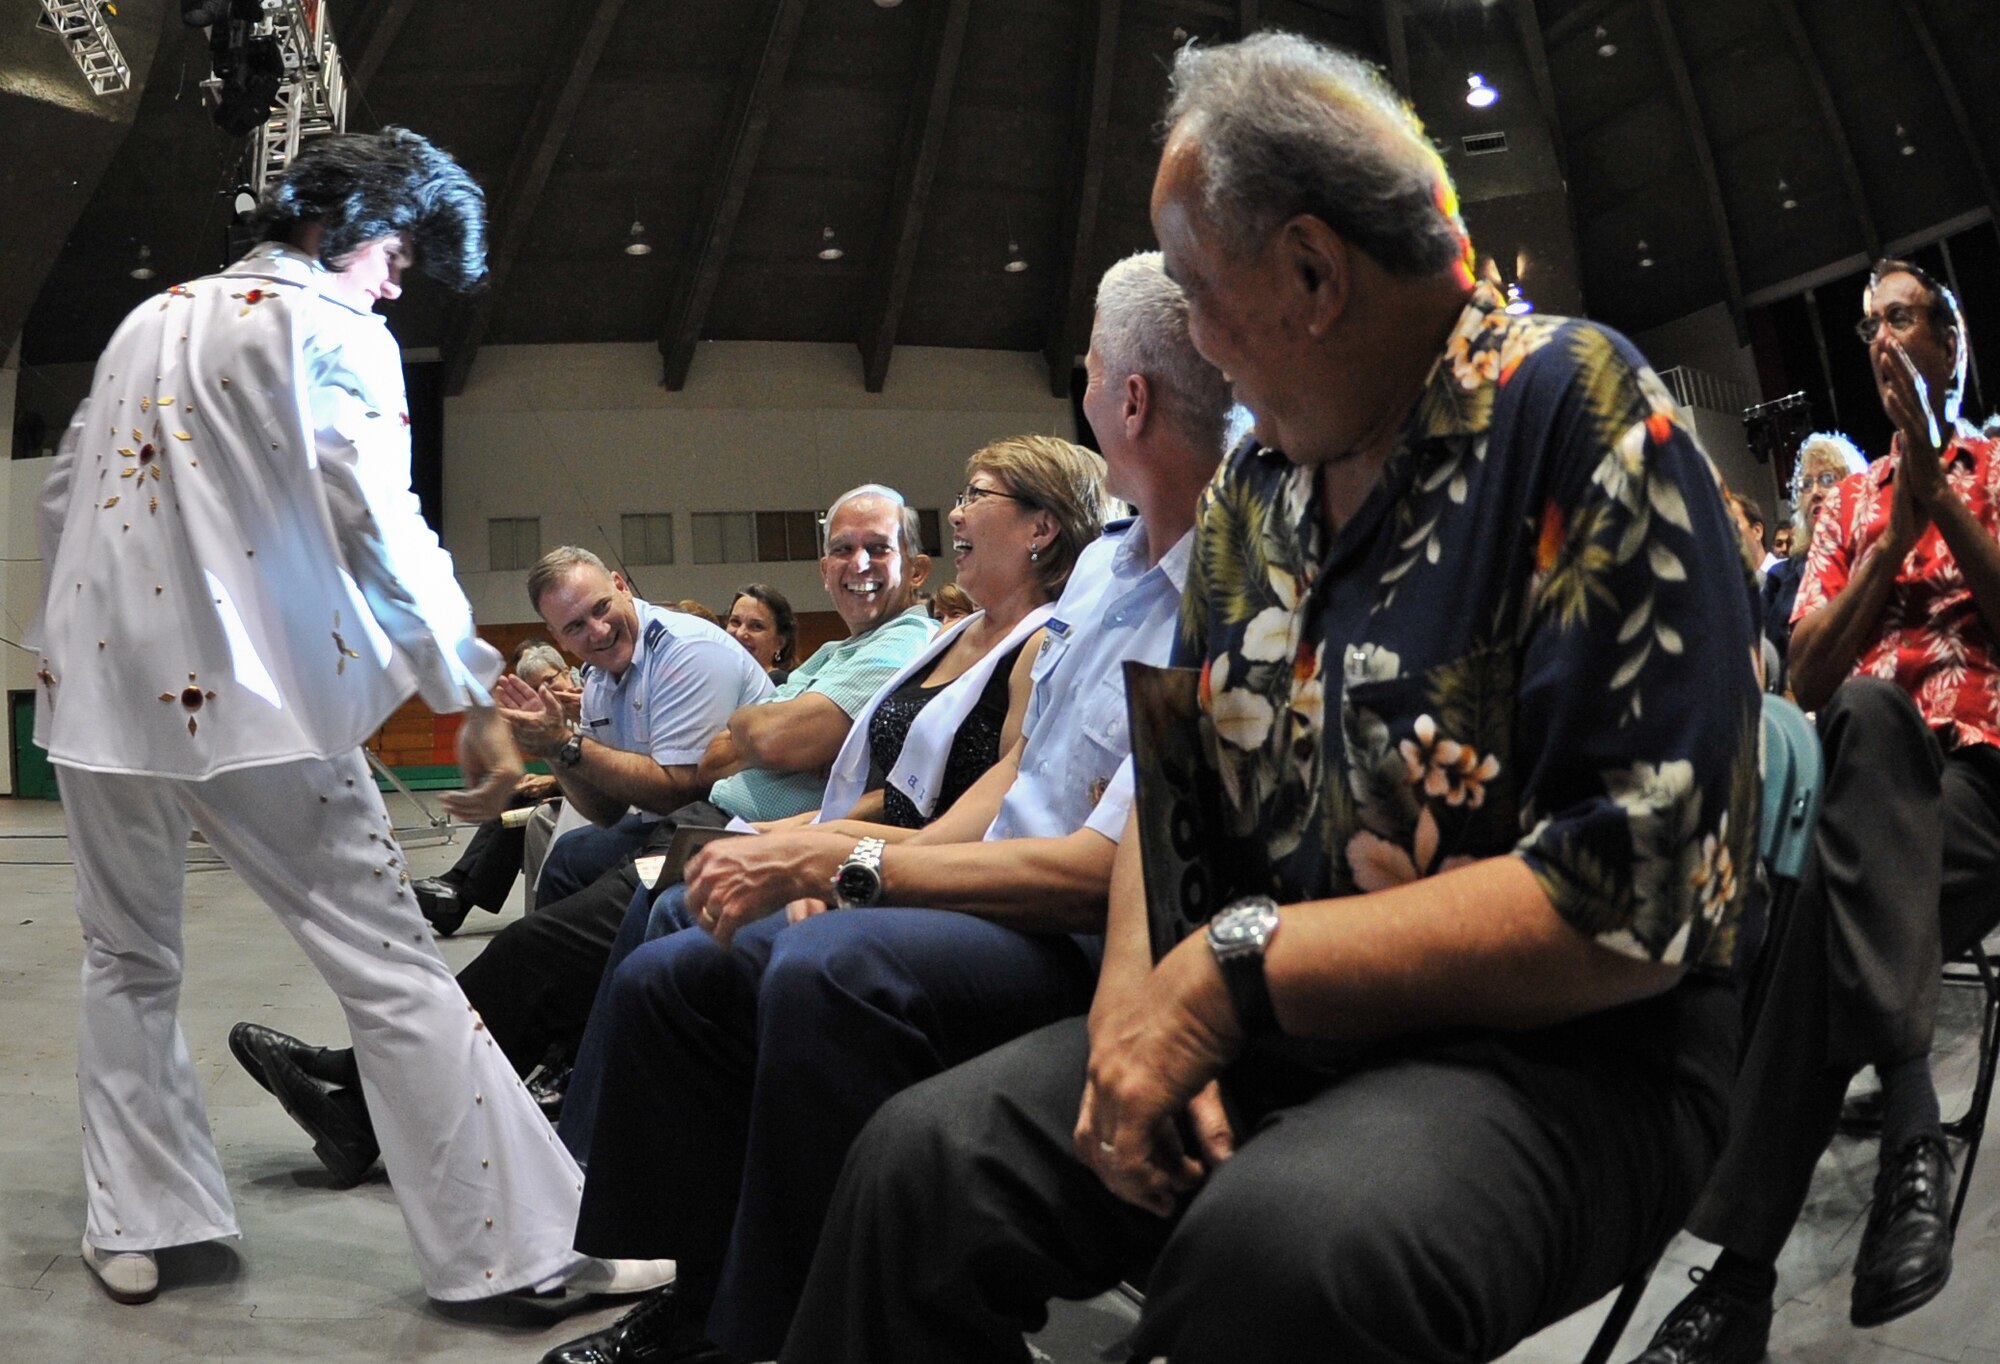 Audience members interact with members of the U.S Air Force Tops in Blue during their “Rhythm Nation” tour Nov. 29 at the University of Guam Field House in Mangilao, Guam. Tops in Blue serves as an expeditionary entertainment unit and provides quality entertainment for the Air Force family while simultaneously promoting community relations, supporting recruiting efforts, and serving as ambassadors for the Unites States and the U.S. Air Force. (U.S. Air Force photo by Staff Sgt. Alexandre Montes/released)